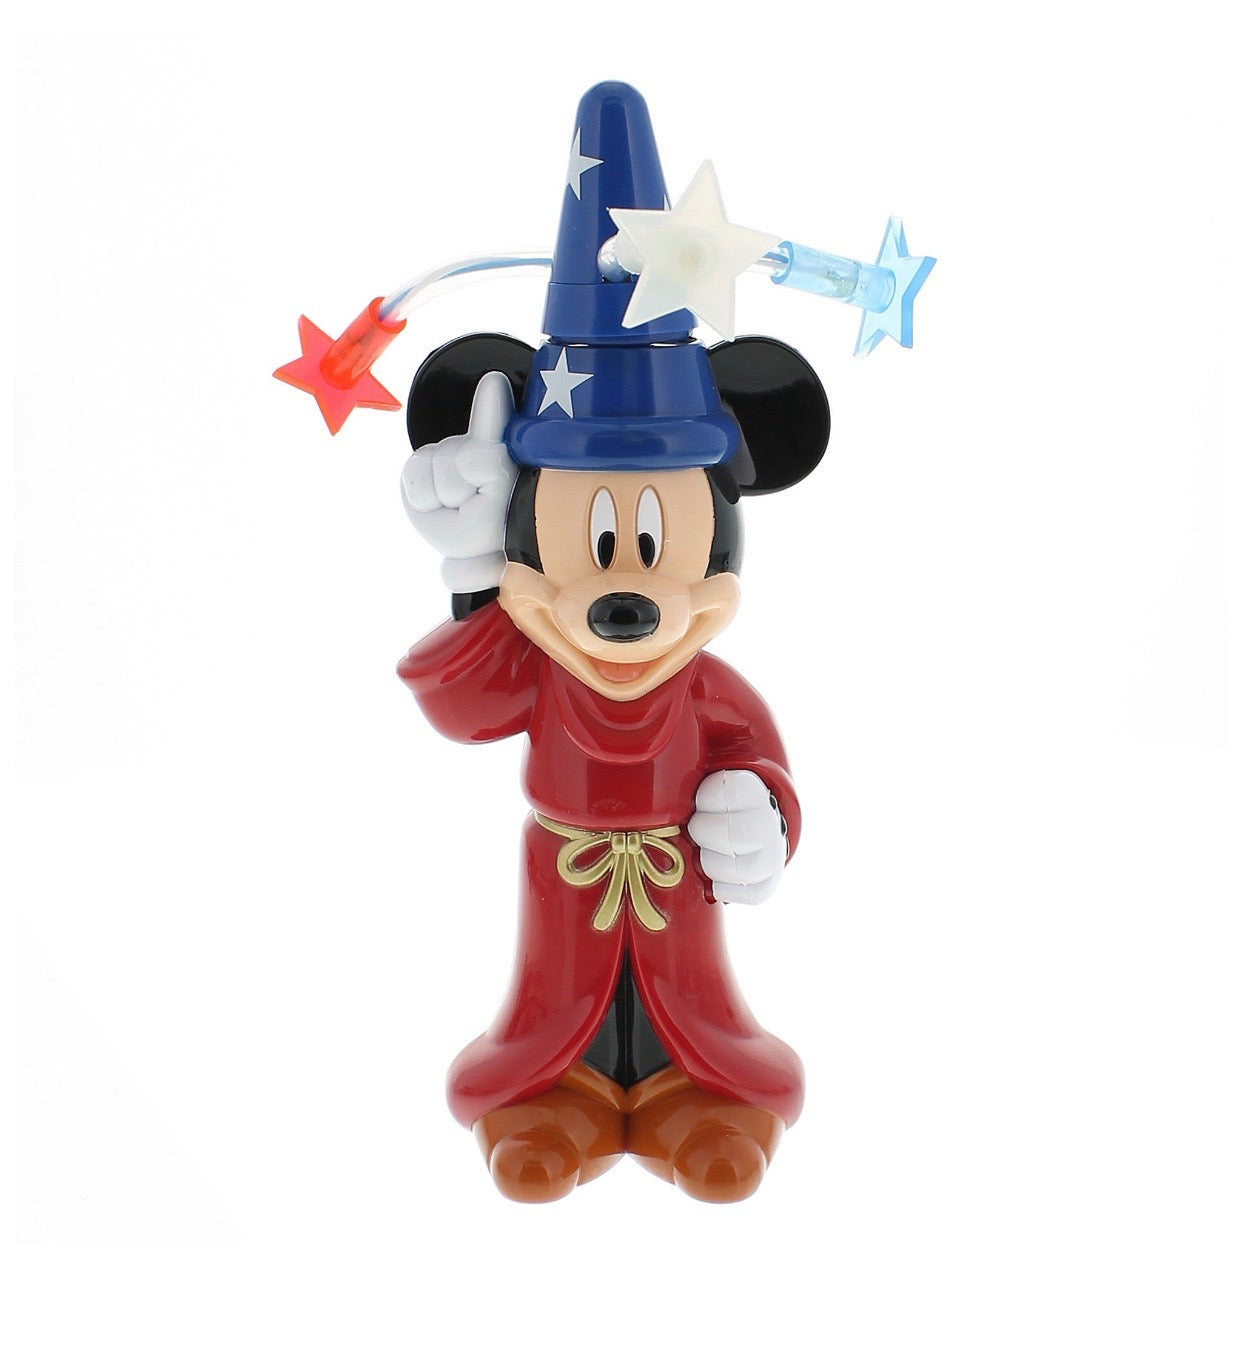 Disney Parks Sorcerer Mickey Light Chaser Toy New with Tags